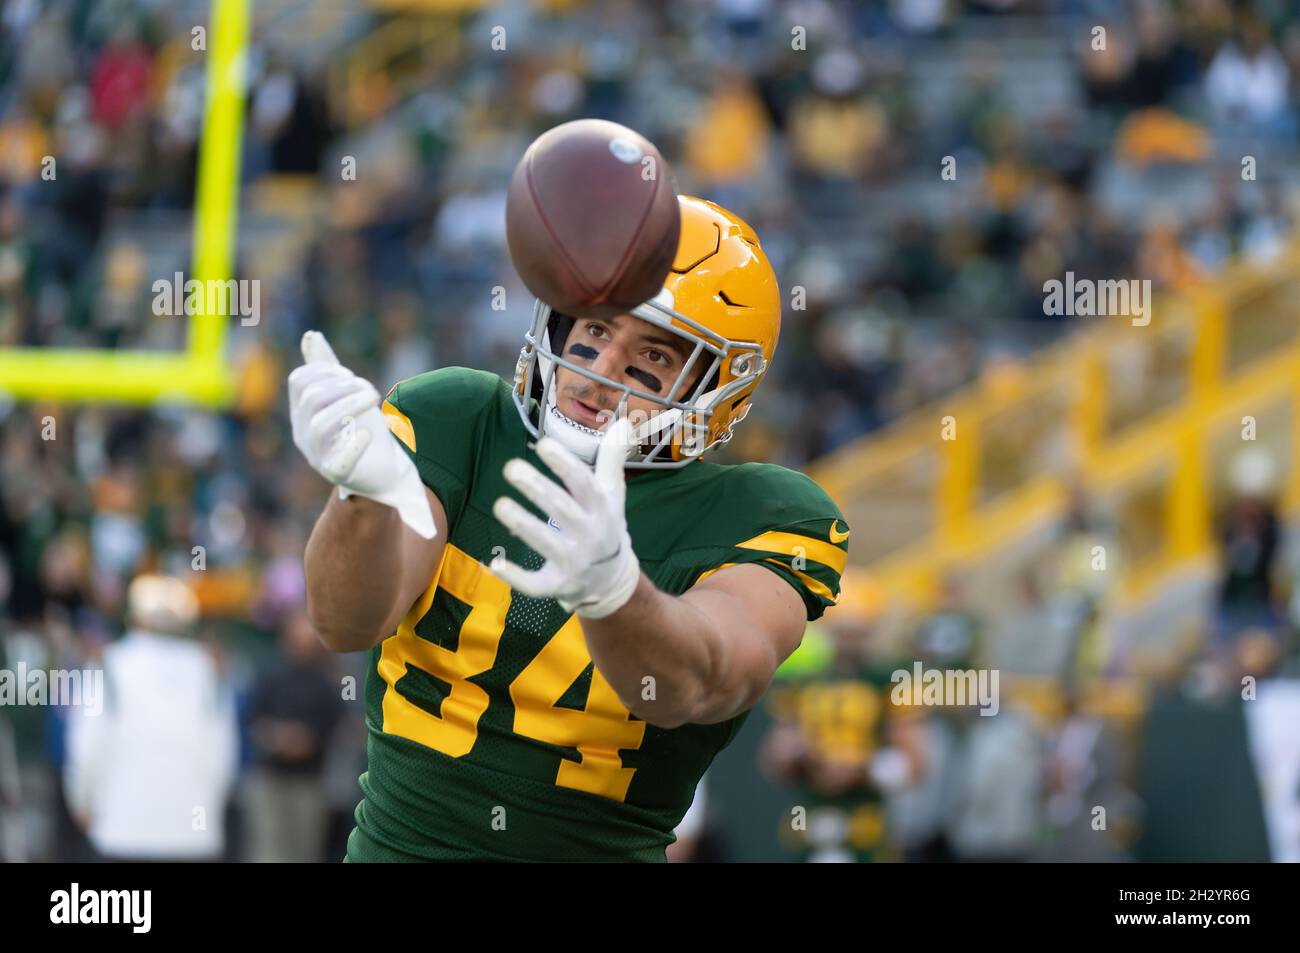 Green Bay, Wisconsin, USA. 24th Oct, 2021. Green Bay Packers tight end  Tyler Davis #84 warms up before the NFL football game between the  Washington Football Team and the Green Bay Packers